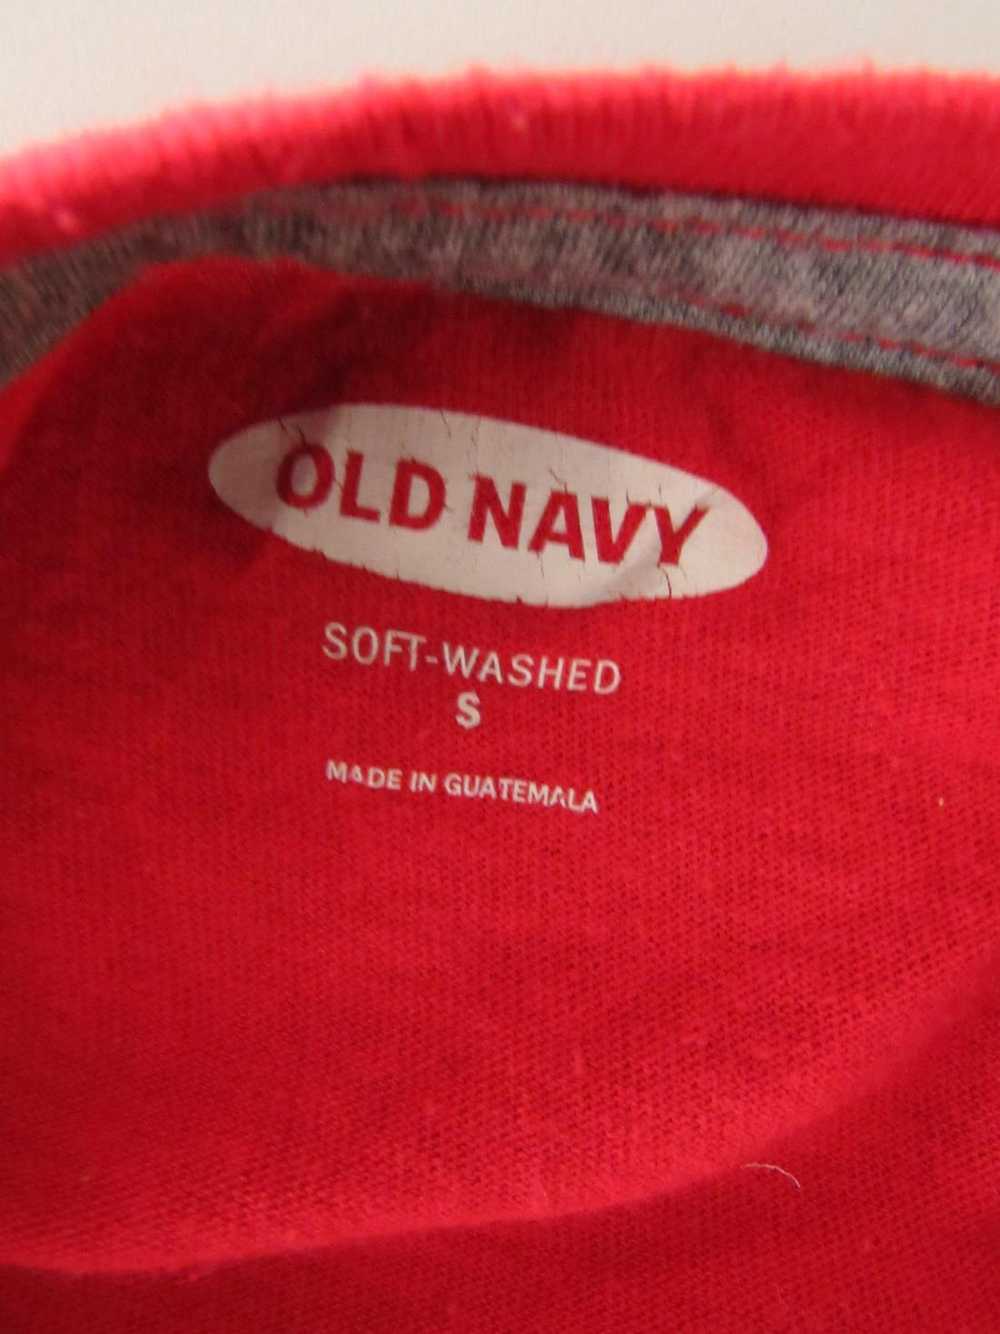 Old Navy Graphic Tee Shirt - image 3